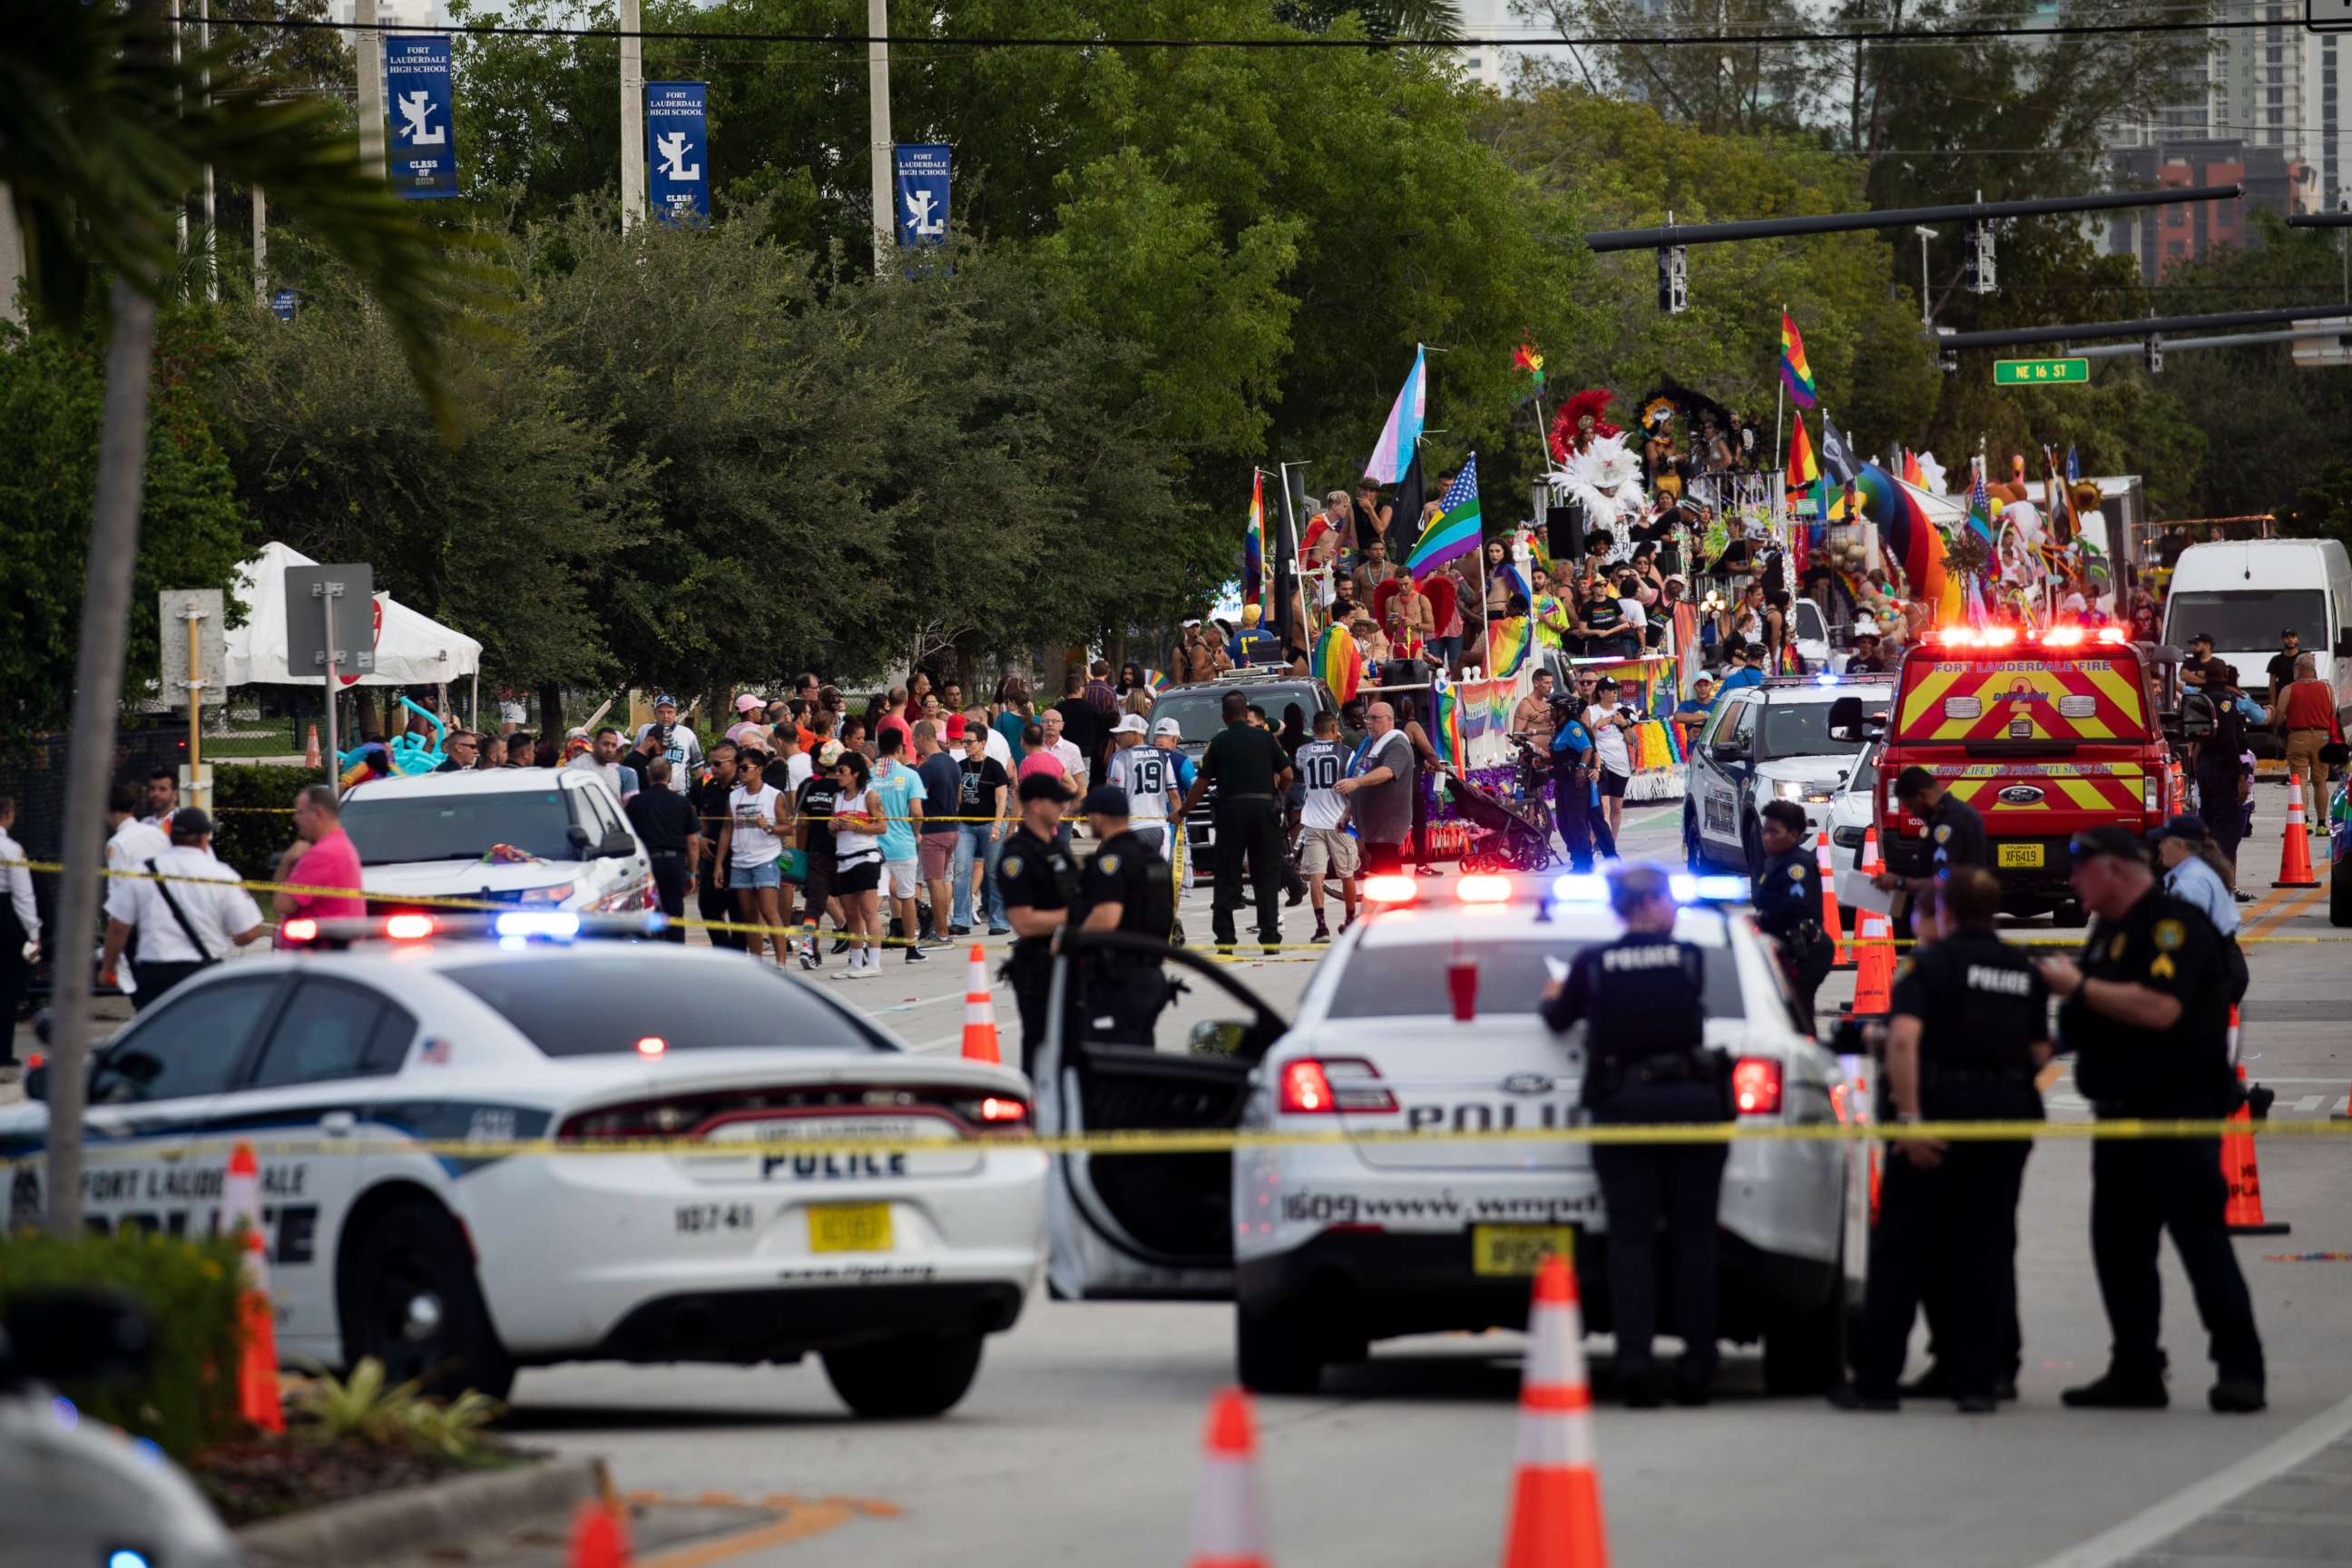 PHOTO: Police and firefighters respond after a truck drove into a crowd of people injuring them during The Stonewall Pride Parade and Street Festival in Wilton Manors, Fla., on Saturday, June 19, 2021.